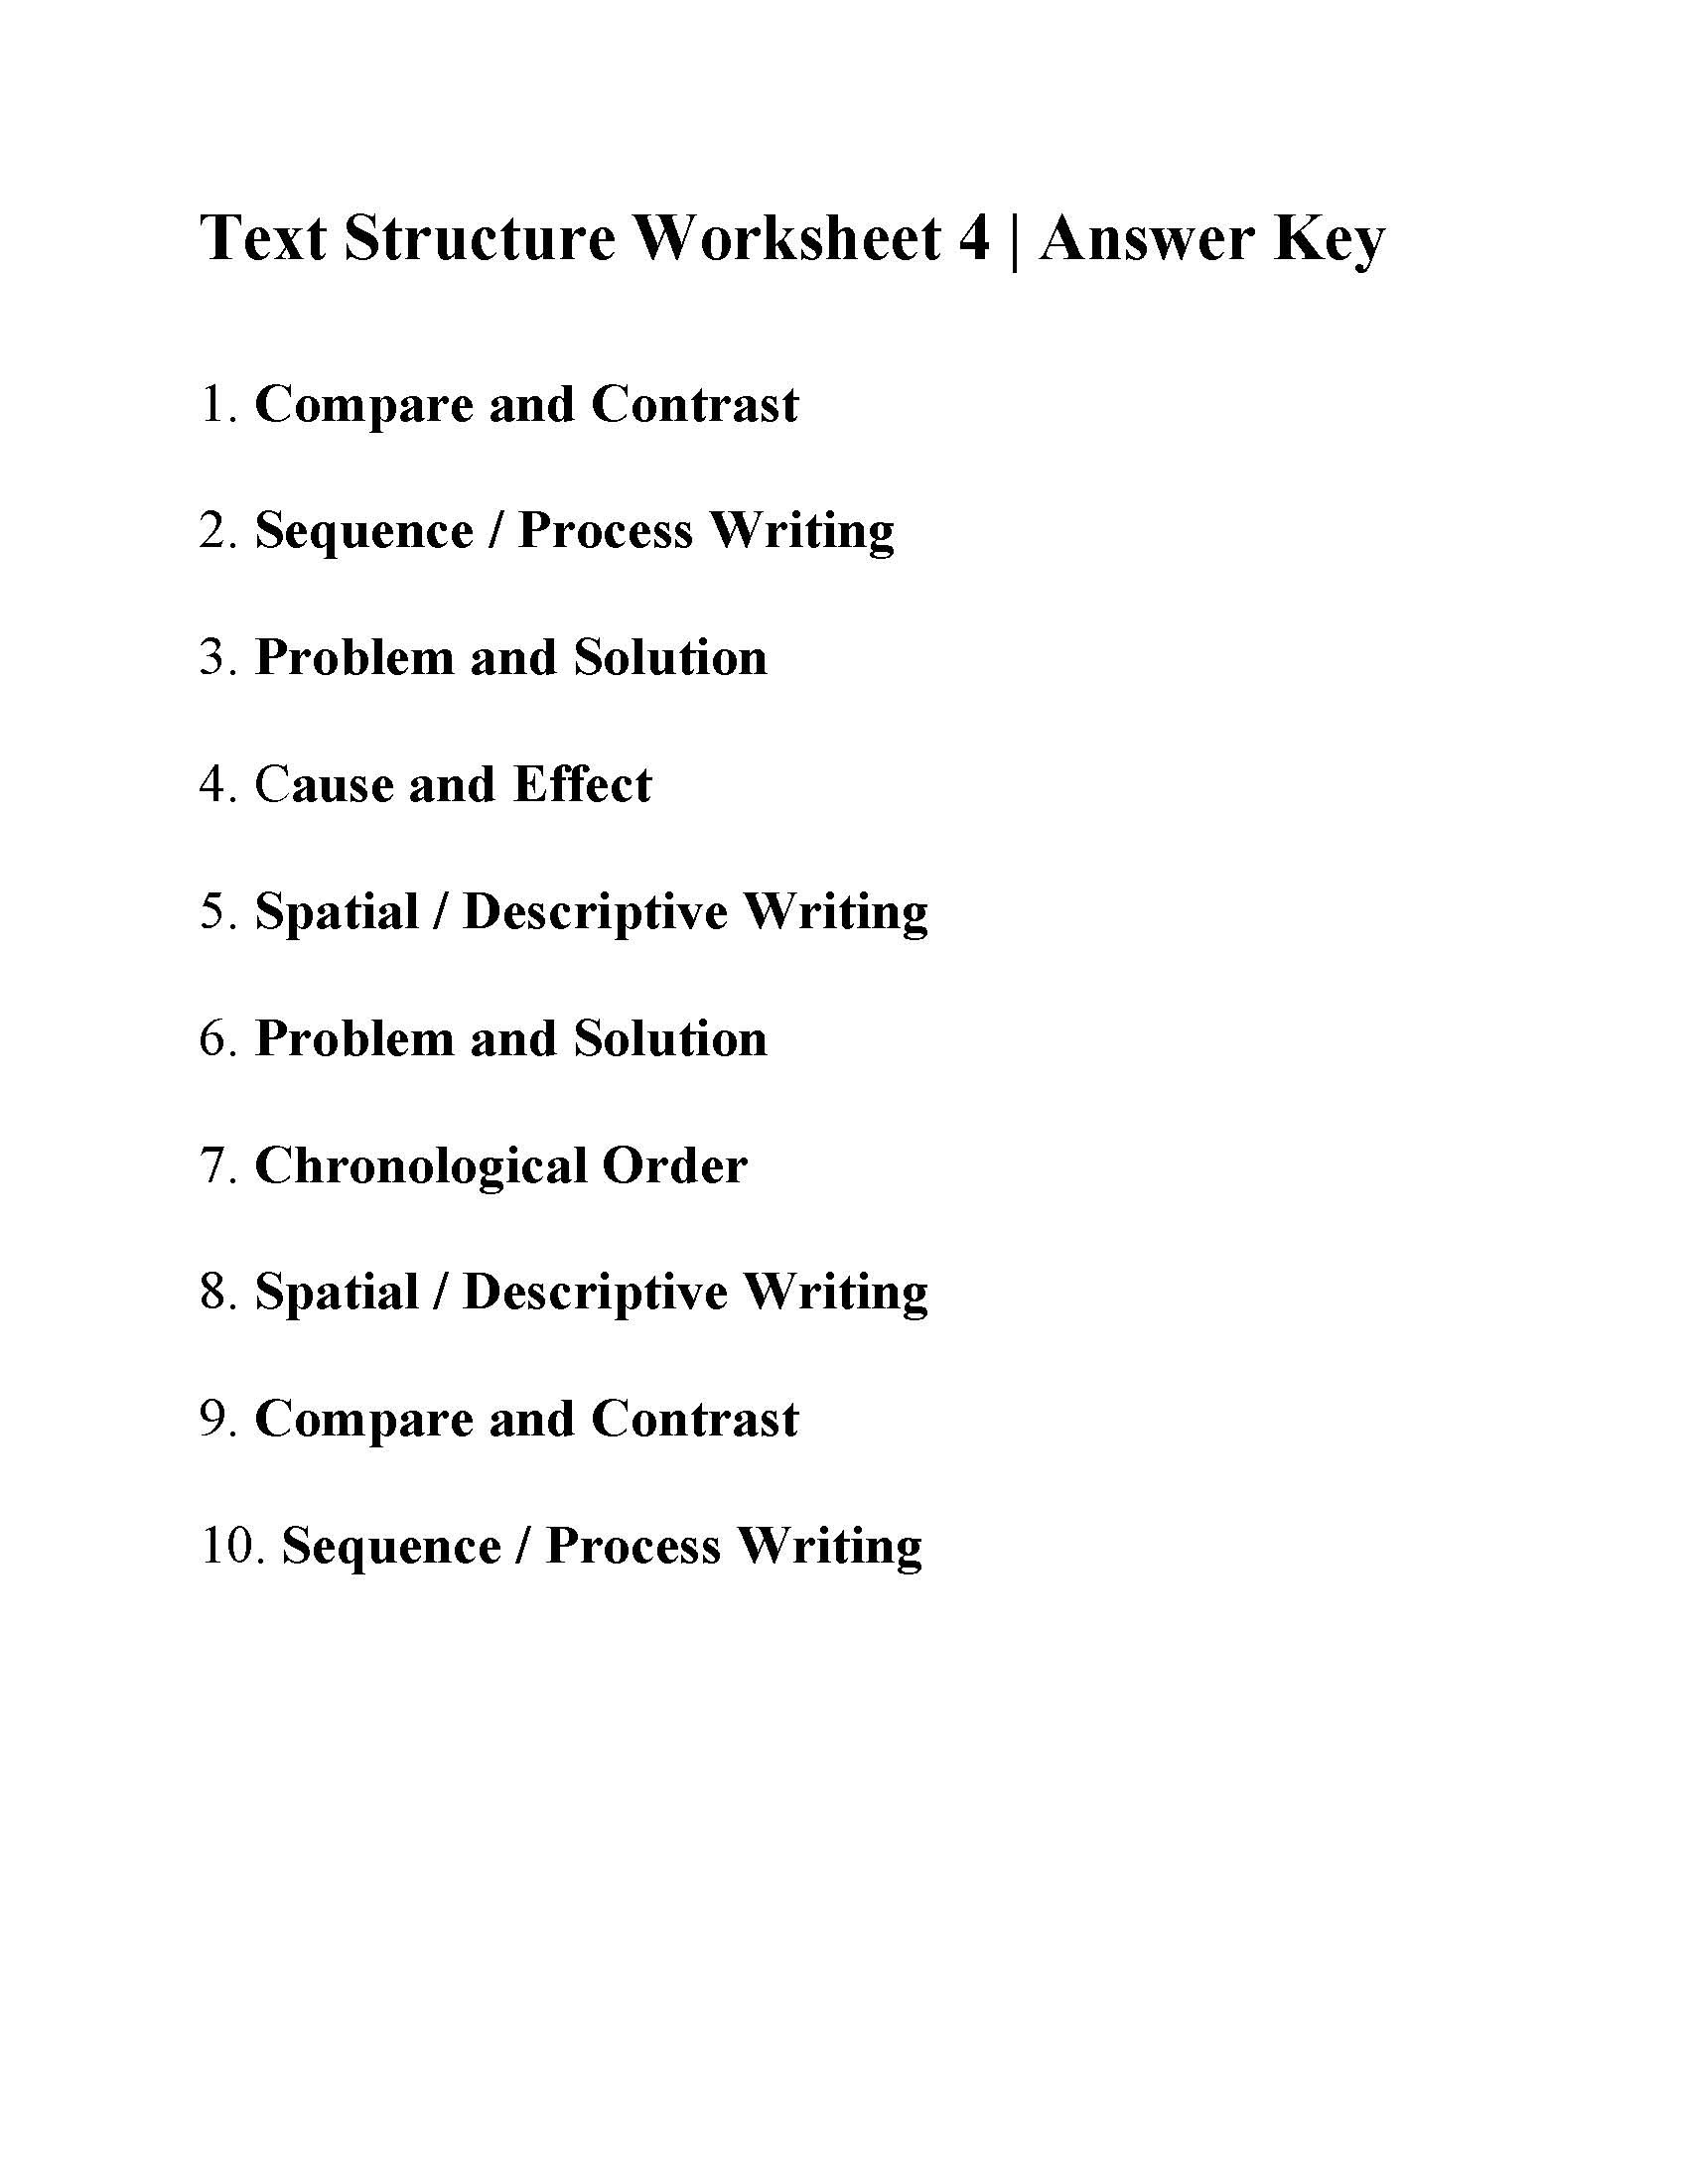 Text Structure Worksheet Pdf Text Structure Worksheet 4